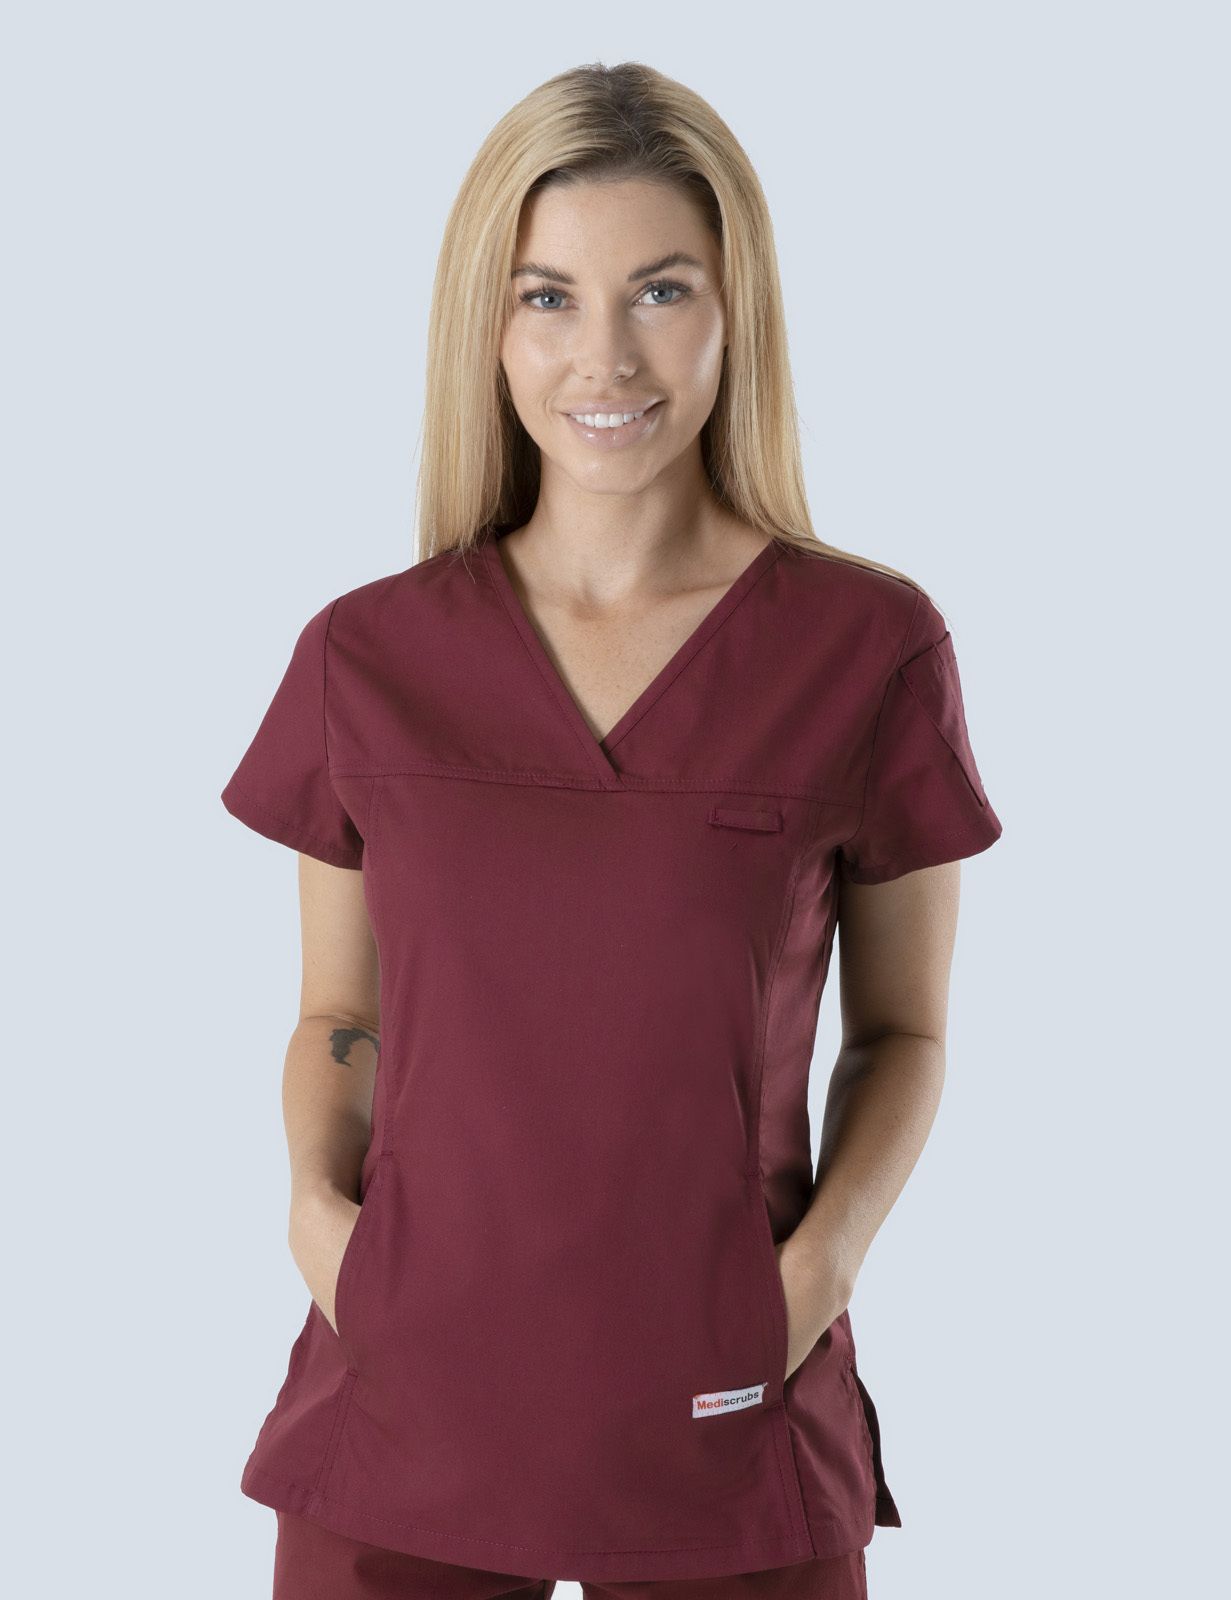 Gympie Hospital - Nursing Practitioner (Women's Fit Solid Scrub Top and Cargo Pants in Burgundy incl Logos)